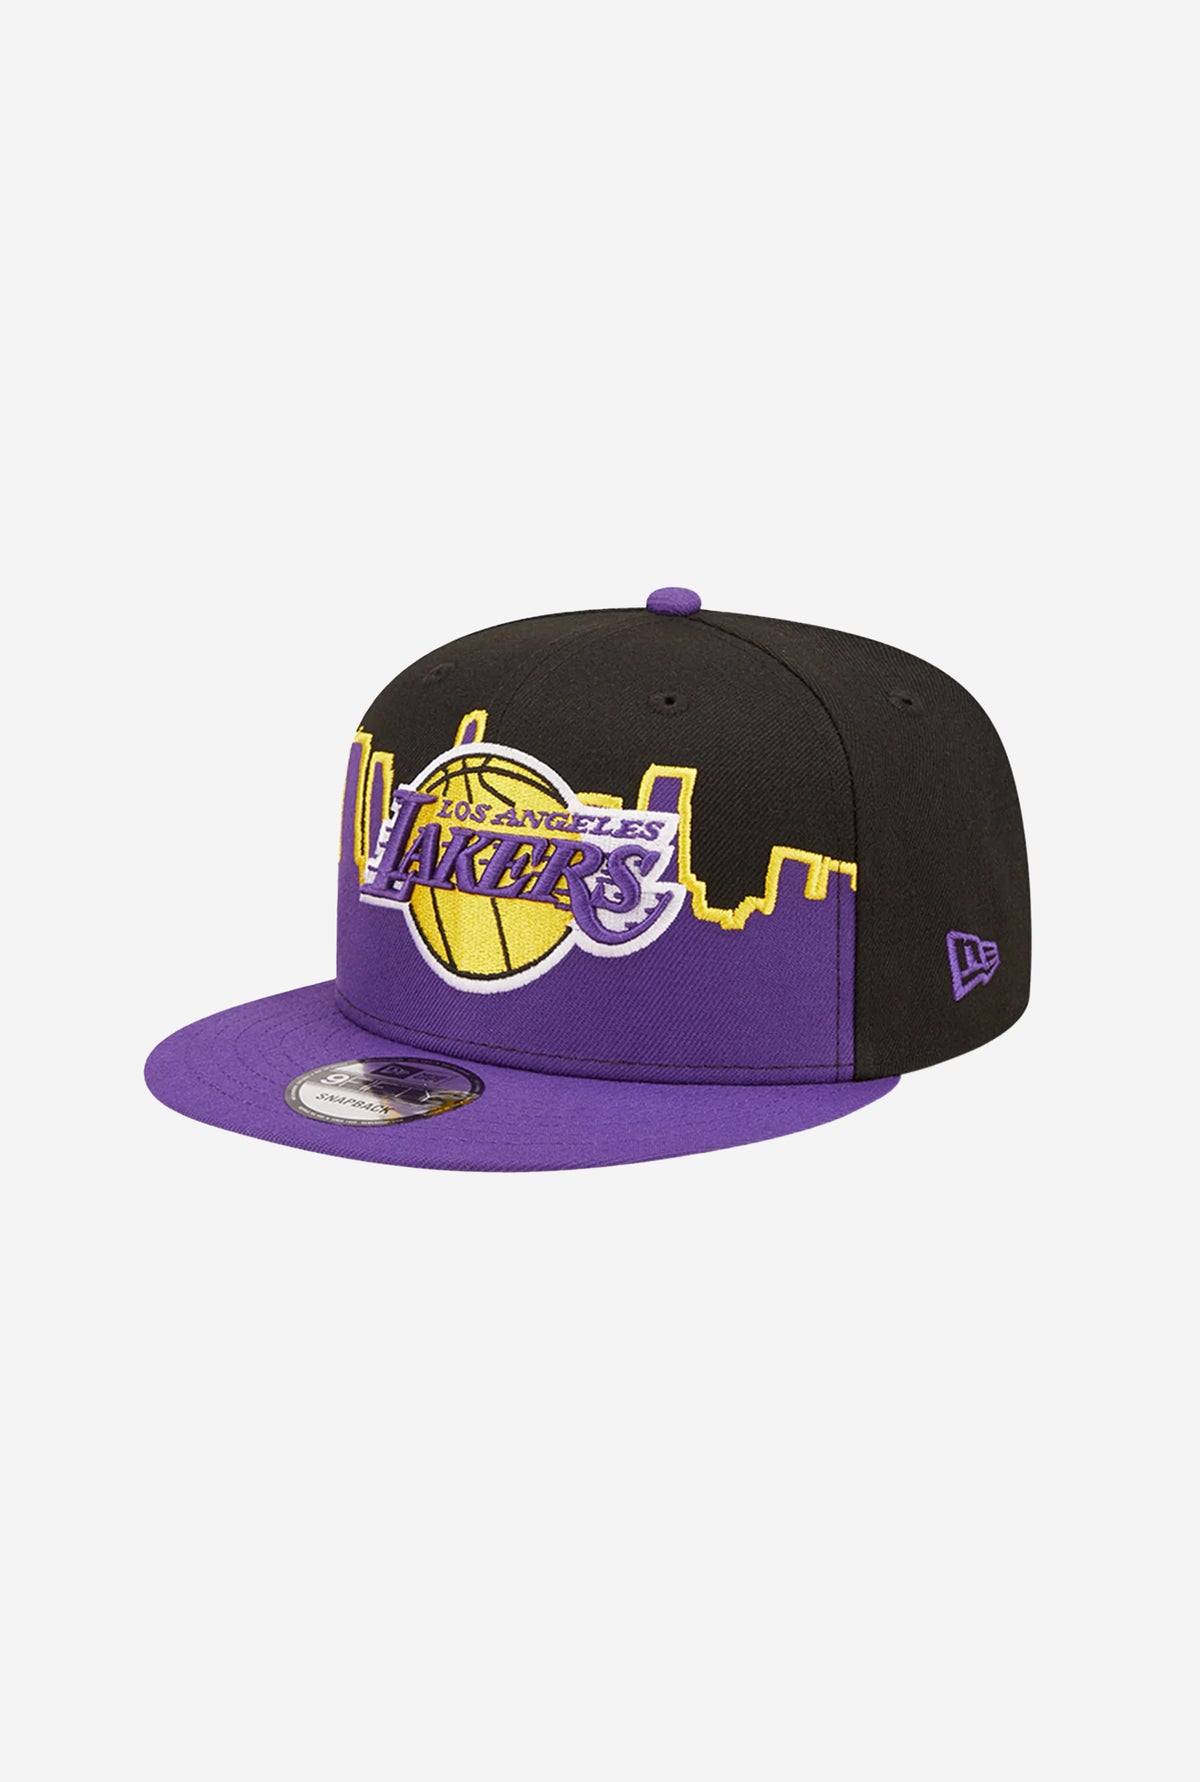 NBA Tip Off 22 Los Angeles Lakers 9FIFTY - Black/Purple